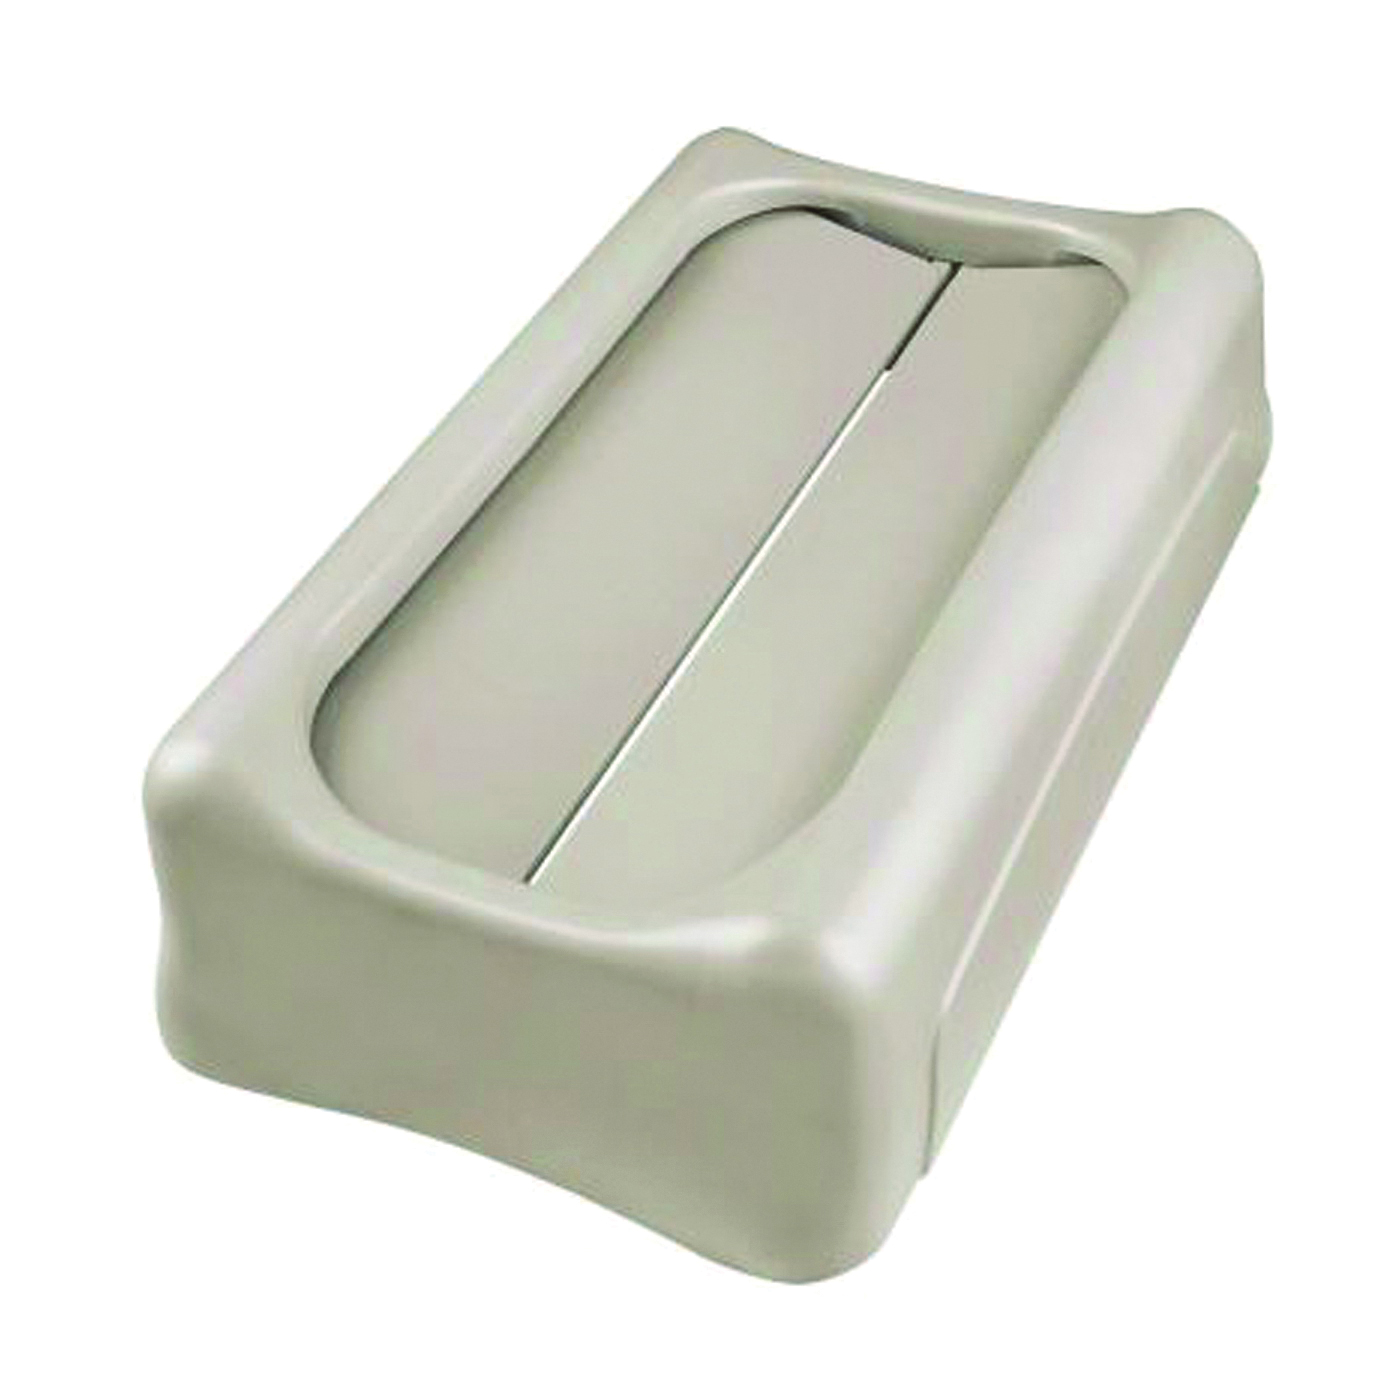 FG267360BEIG Swing Lid, 23 gal, Plastic, Beige, For: 15-7/8 and 23 gal Slim Jim Containers